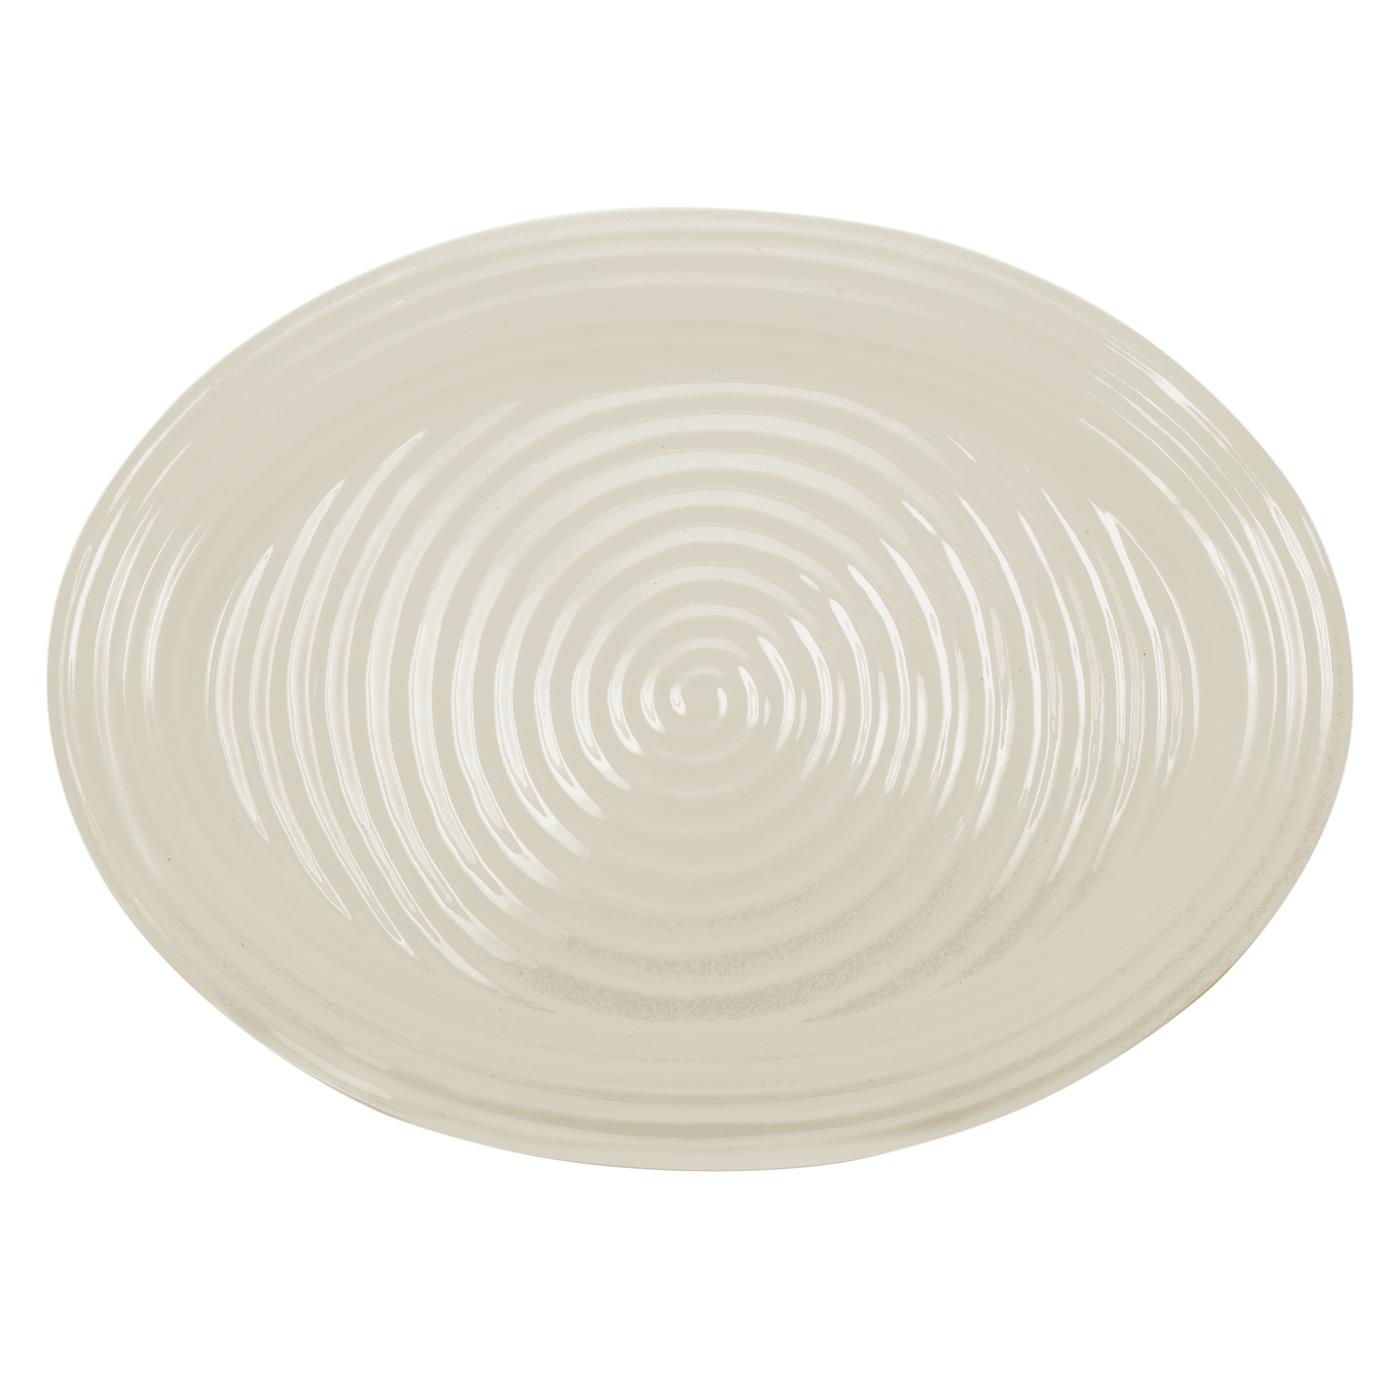 Sophie Conran Pebble Large Oval Platter image number null